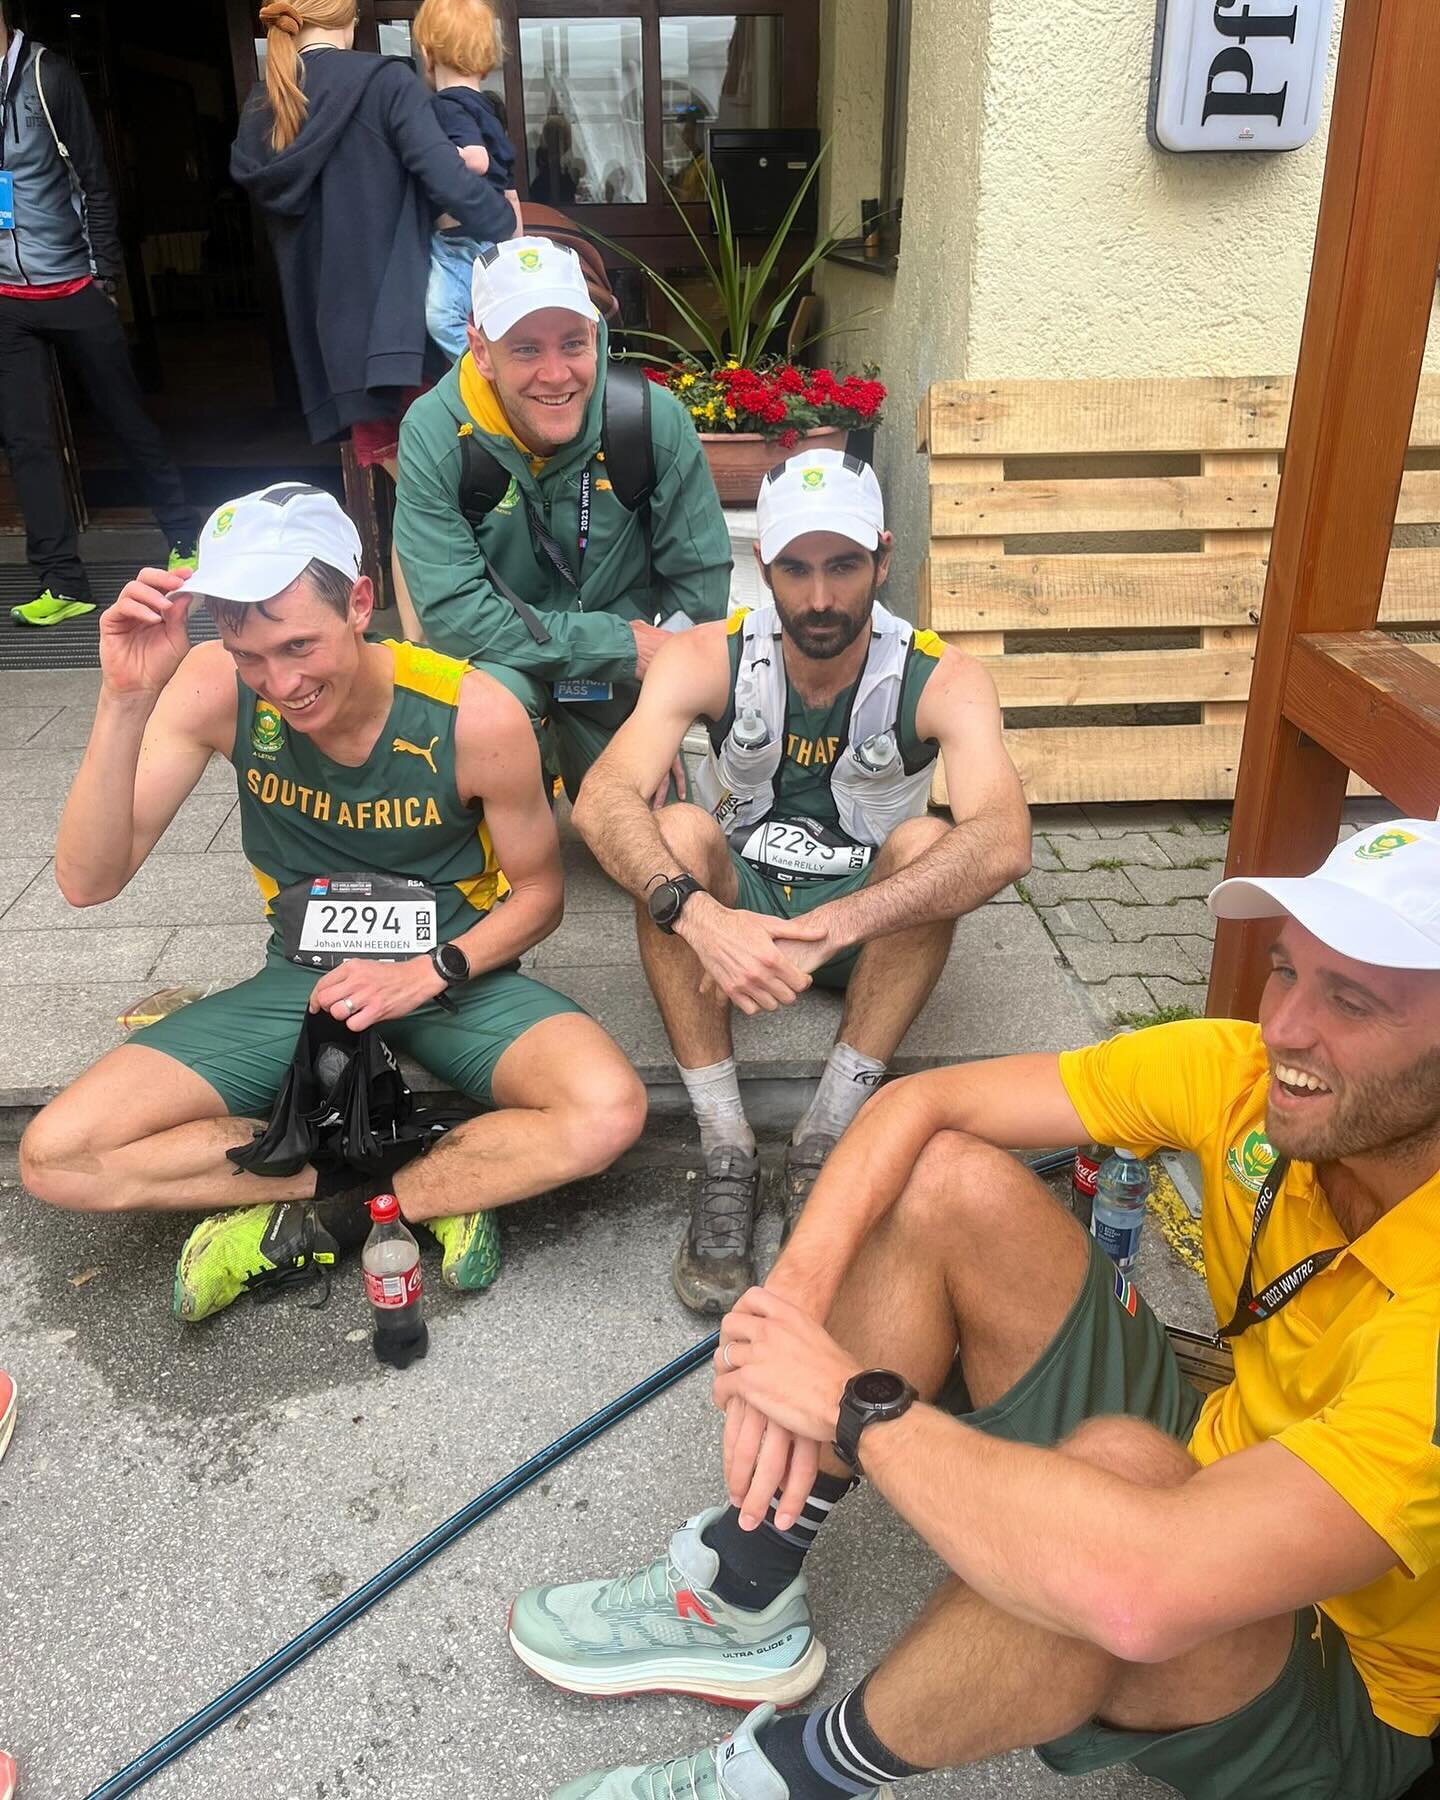 Puzzling and humbled 🤔?

Sitting at the end of the trail marathon at World Championships in Innsbruck awed and in somewhat disbelief (again) at the quality and depth of the top athletes in the sport and how to bridge the gap to them.

There was noth